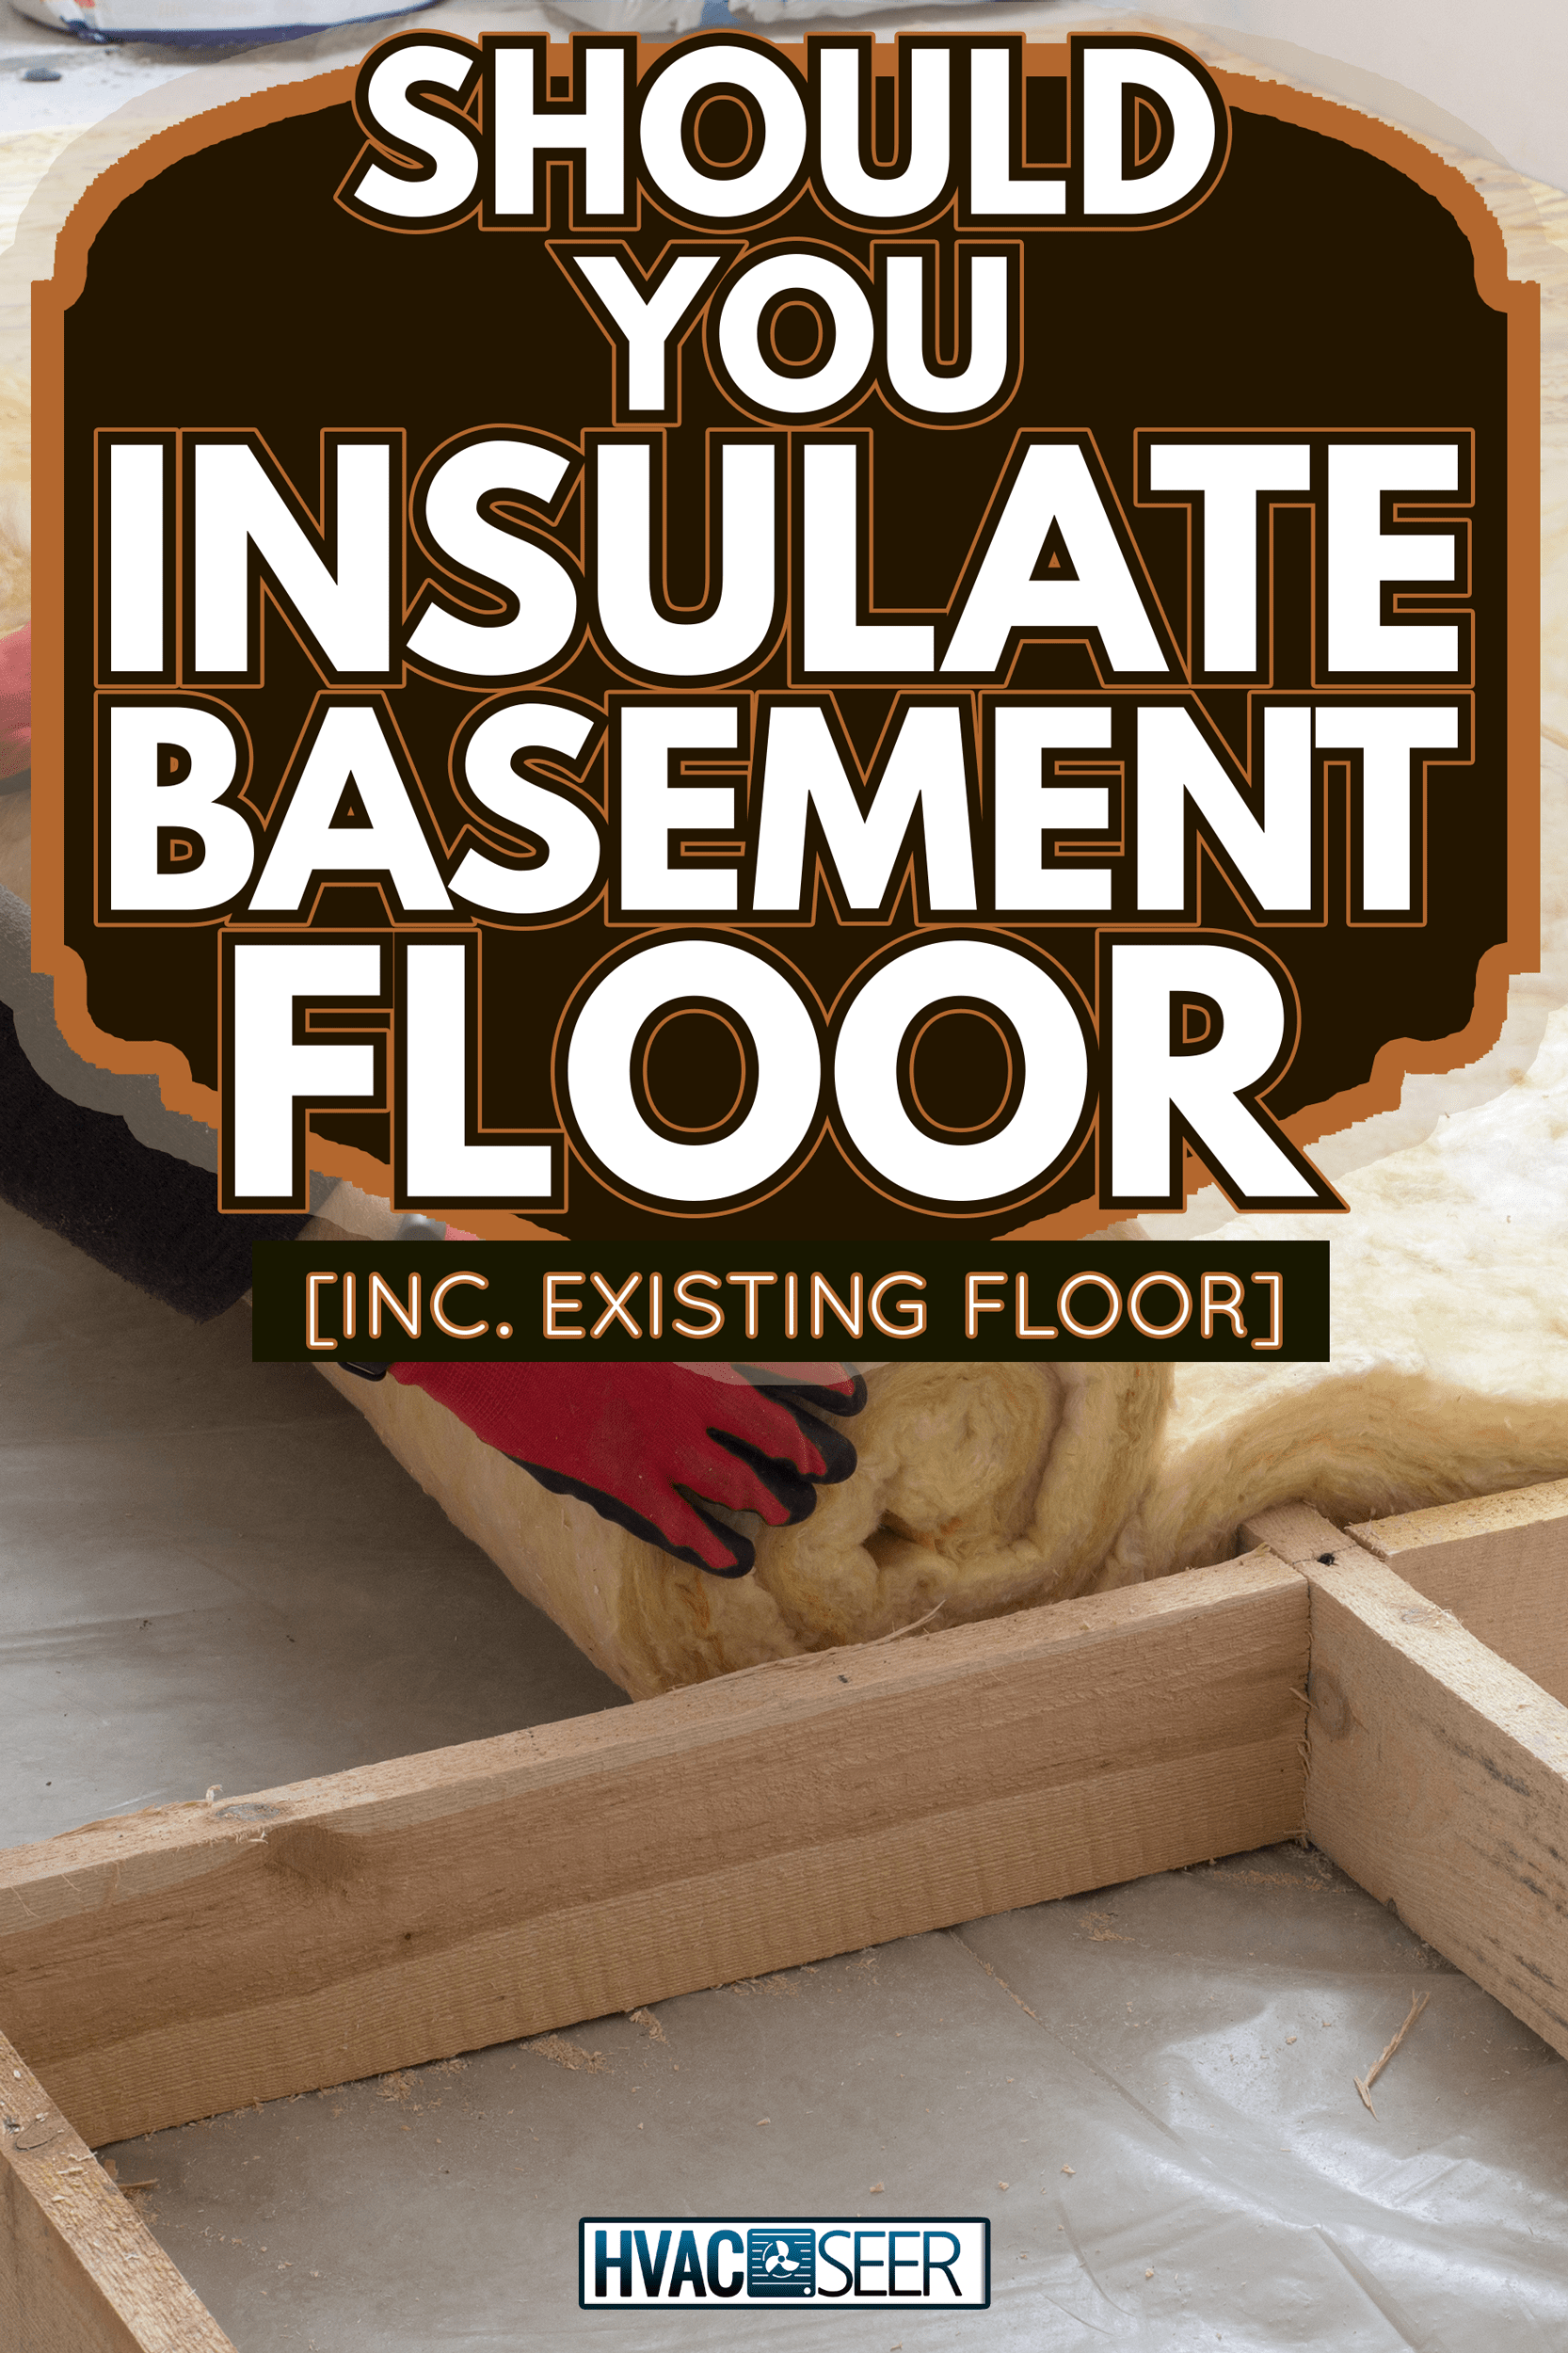 Work composed of mineral wool insulation in the floor, floor heating insulation , warm house, eco-friendly insulation, a builder at work - Should You Insulate Basement Floor [Inc. Existing Floor]